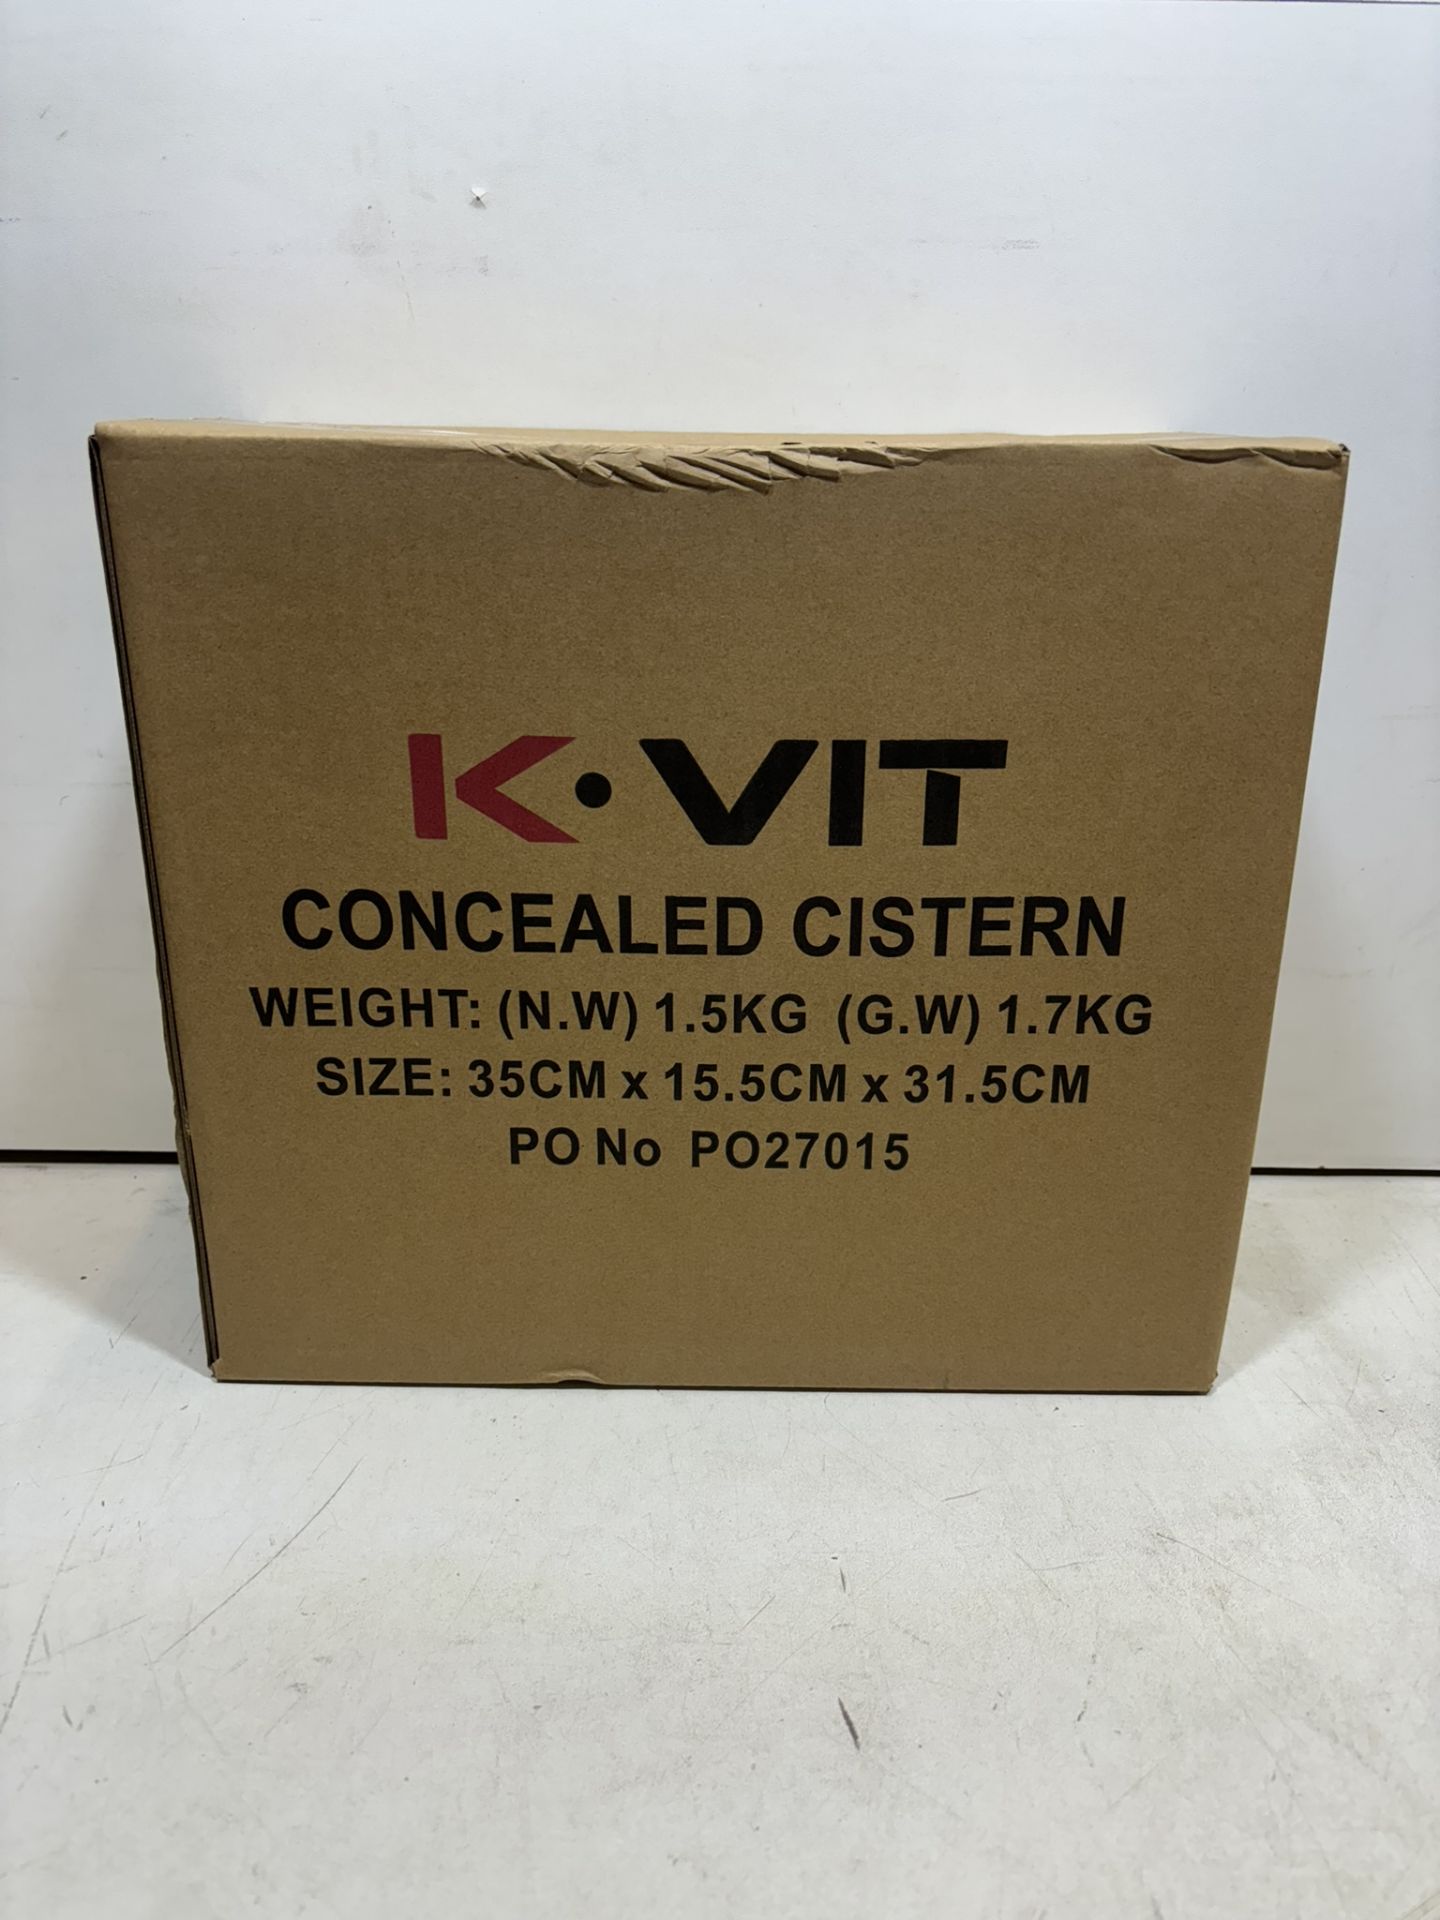 3 x Kartell K-Vit ACC001N Concealed Cistern Top Or Front Access - Image 2 of 3